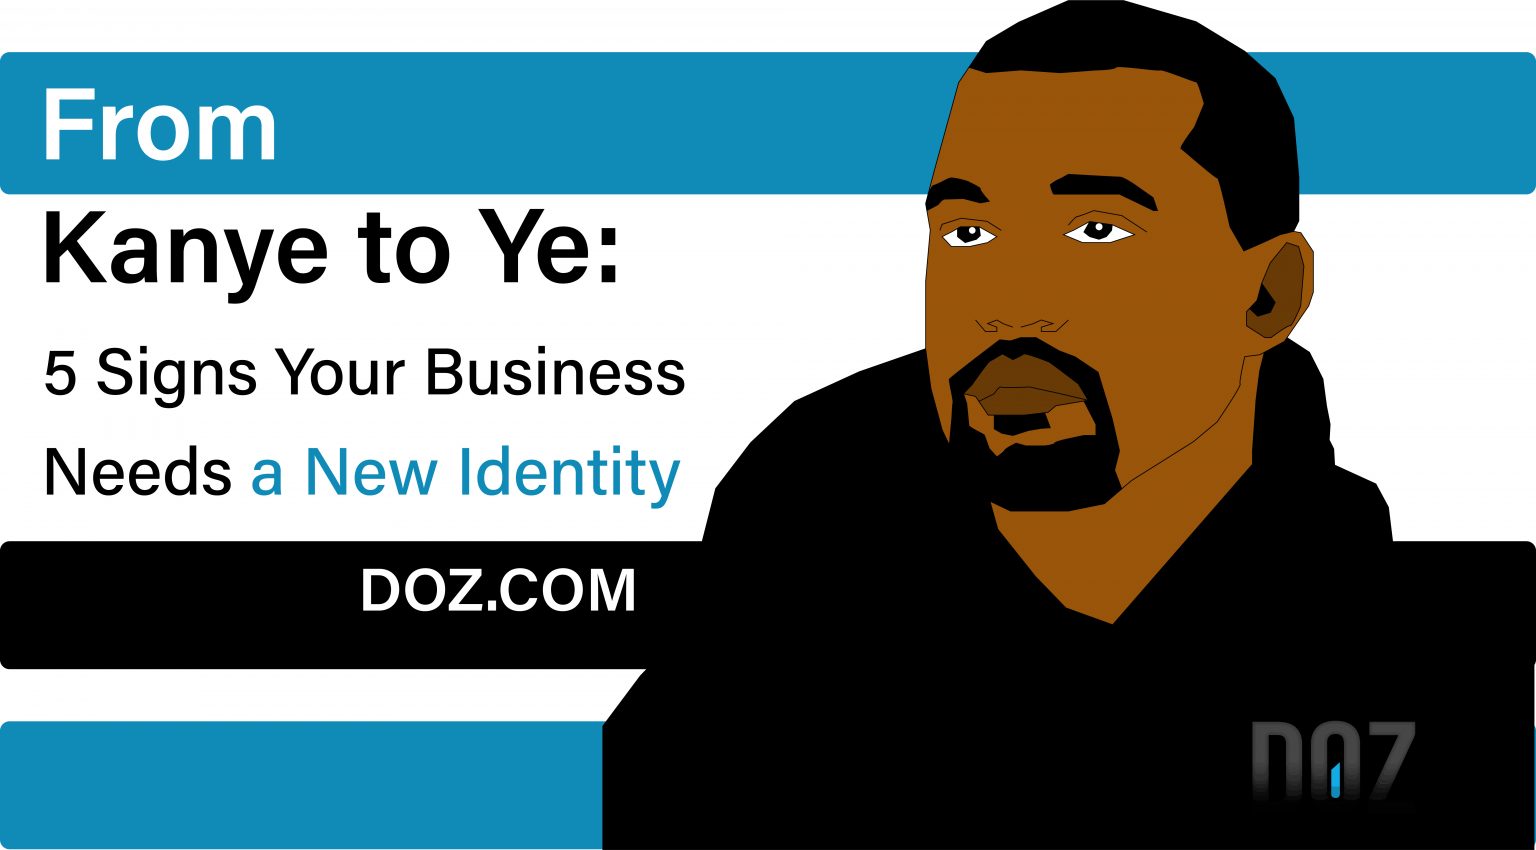 Xxx Pro Bep Com Mp3 - From Kanye to Ye : 5 Signs Your Business Needs a New Identity | DOZ